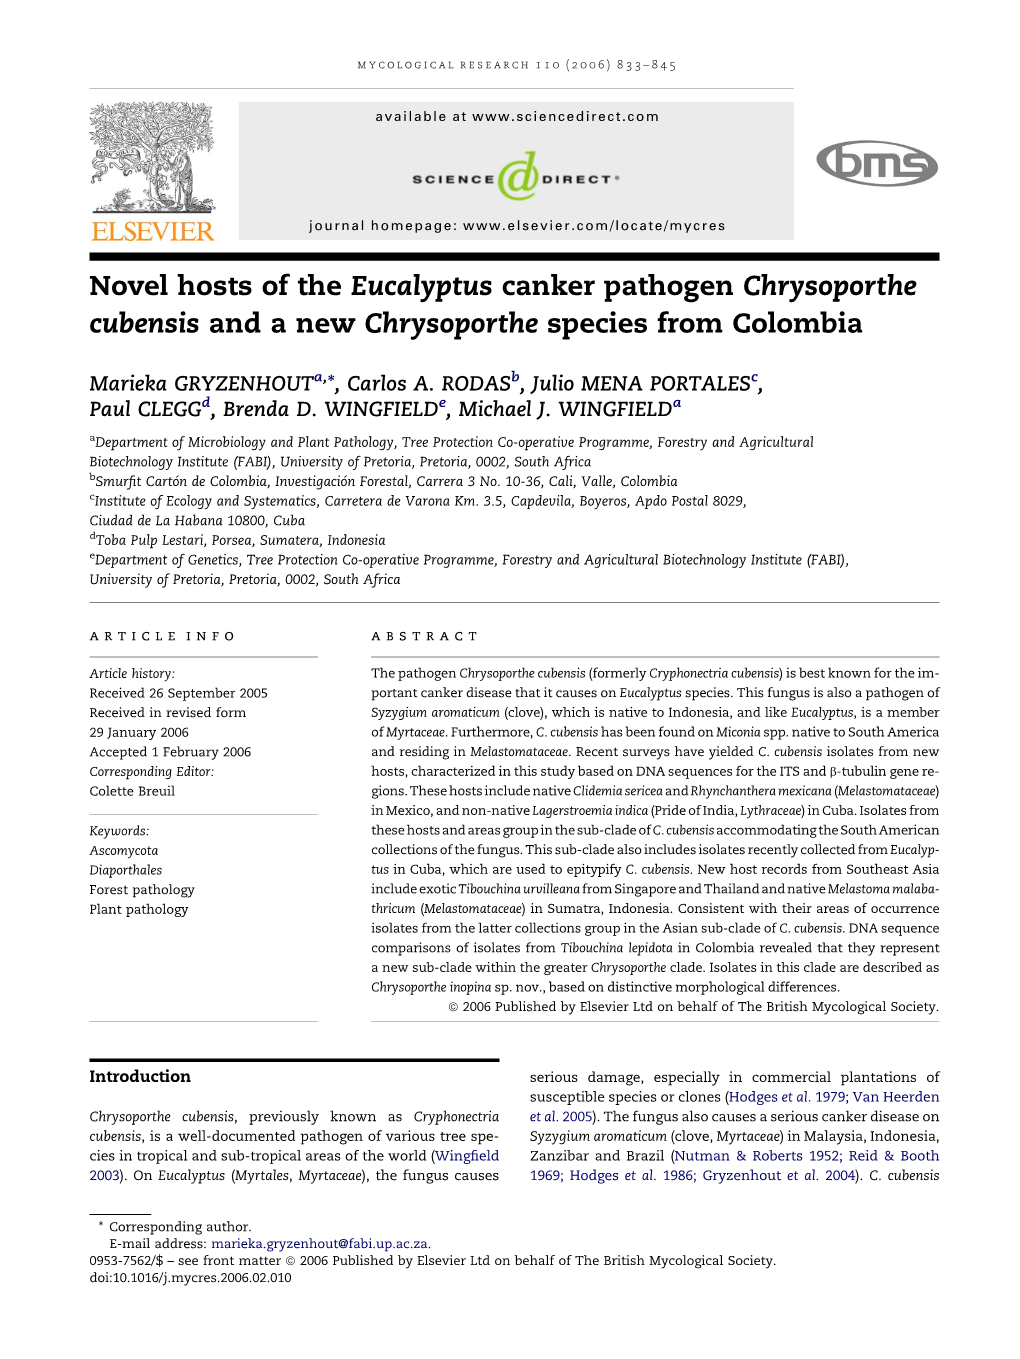 Novel Hosts of the Eucalyptus Canker Pathogen Chrysoporthe Cubensis and a New Chrysoporthe Species from Colombia